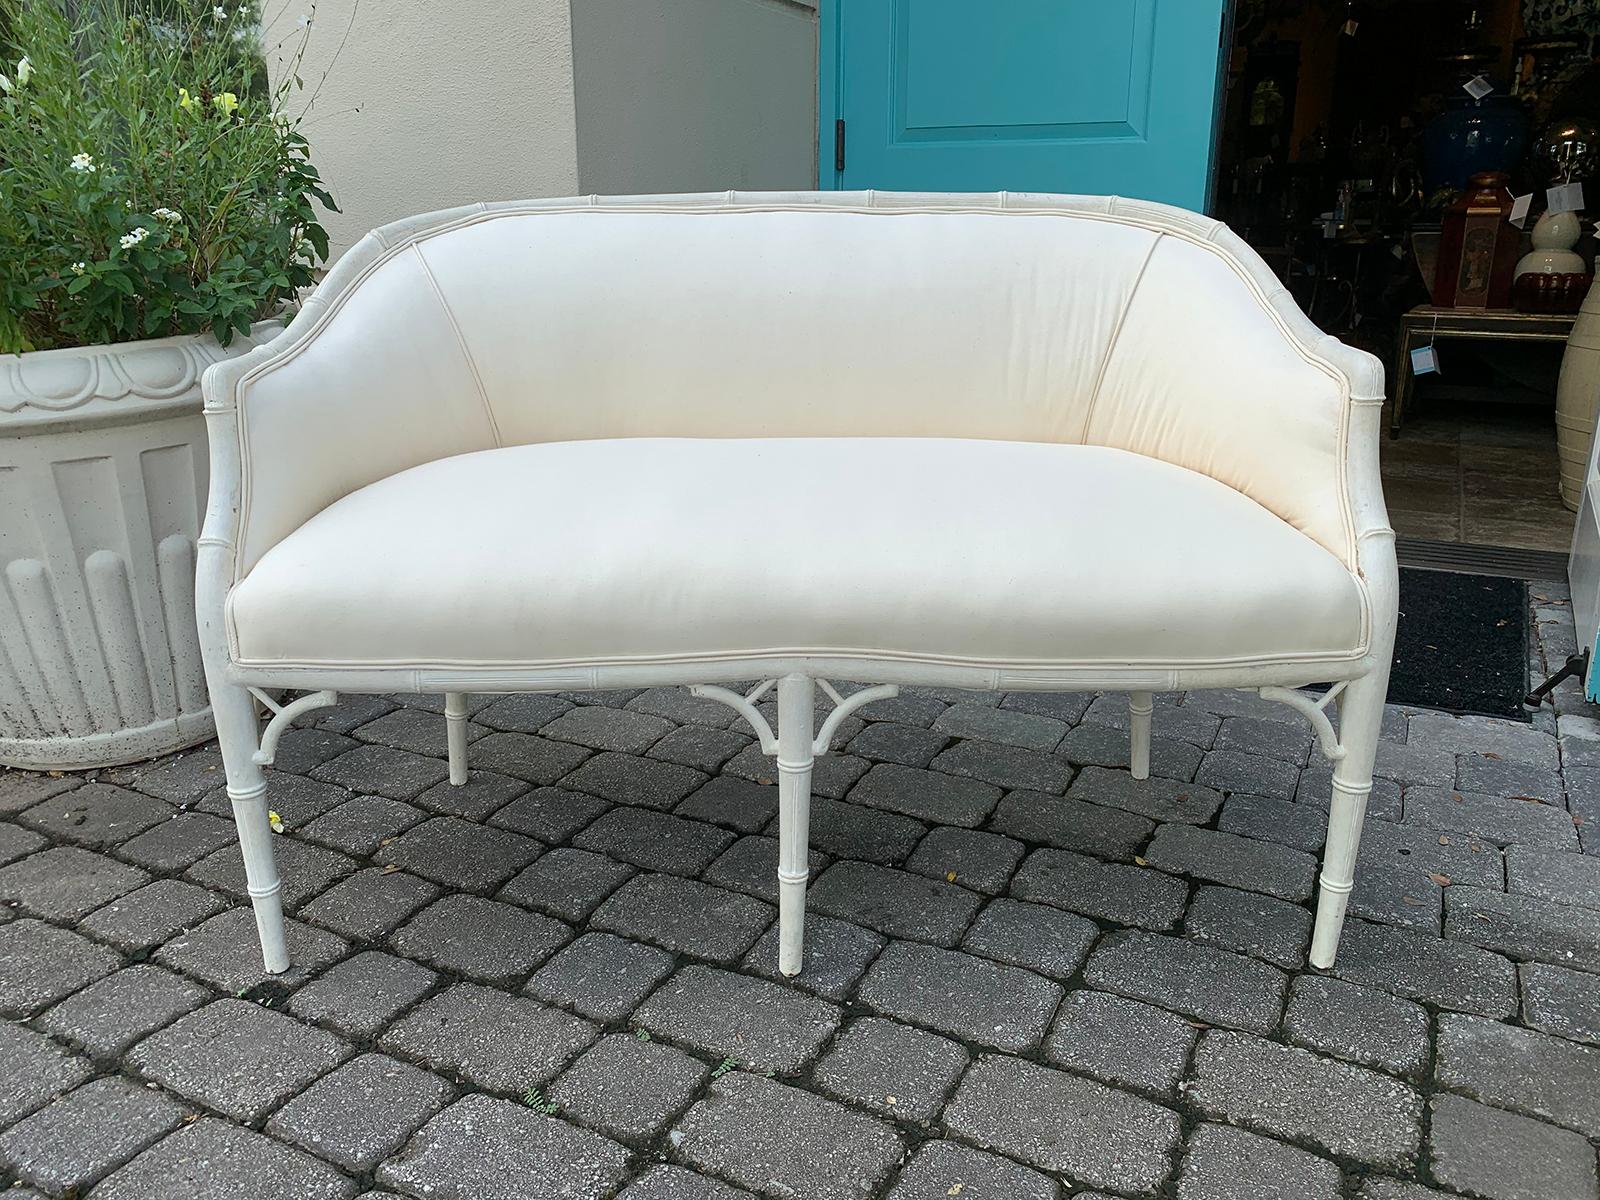 Mid-20th century painted bamboo settee with custom finish
Upholstered in muslin
Measures: Seat: 19